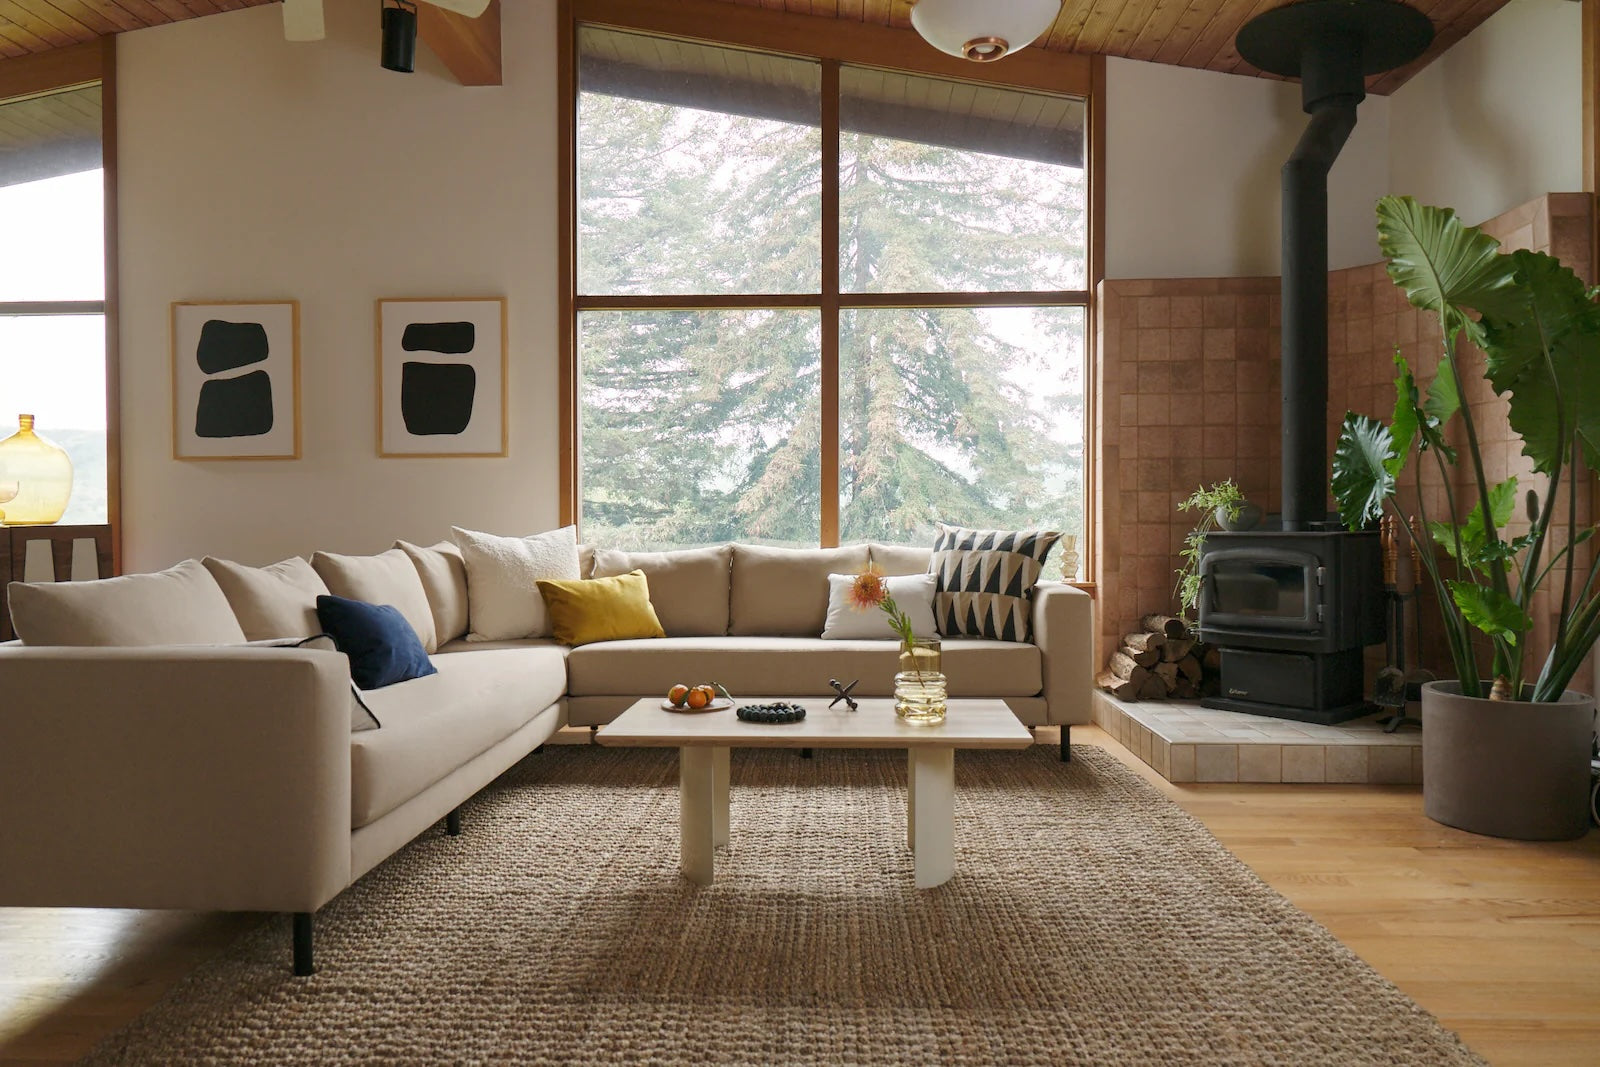 Spacious living room with a modern, neutral-toned sofa, assorted throw pillows, a wooden coffee table, and a wood-burning stove in the corner. Large windows showcase an outdoor view of trees. Minimalist art and indoor plants add to the cozy, contemporary ambiance.